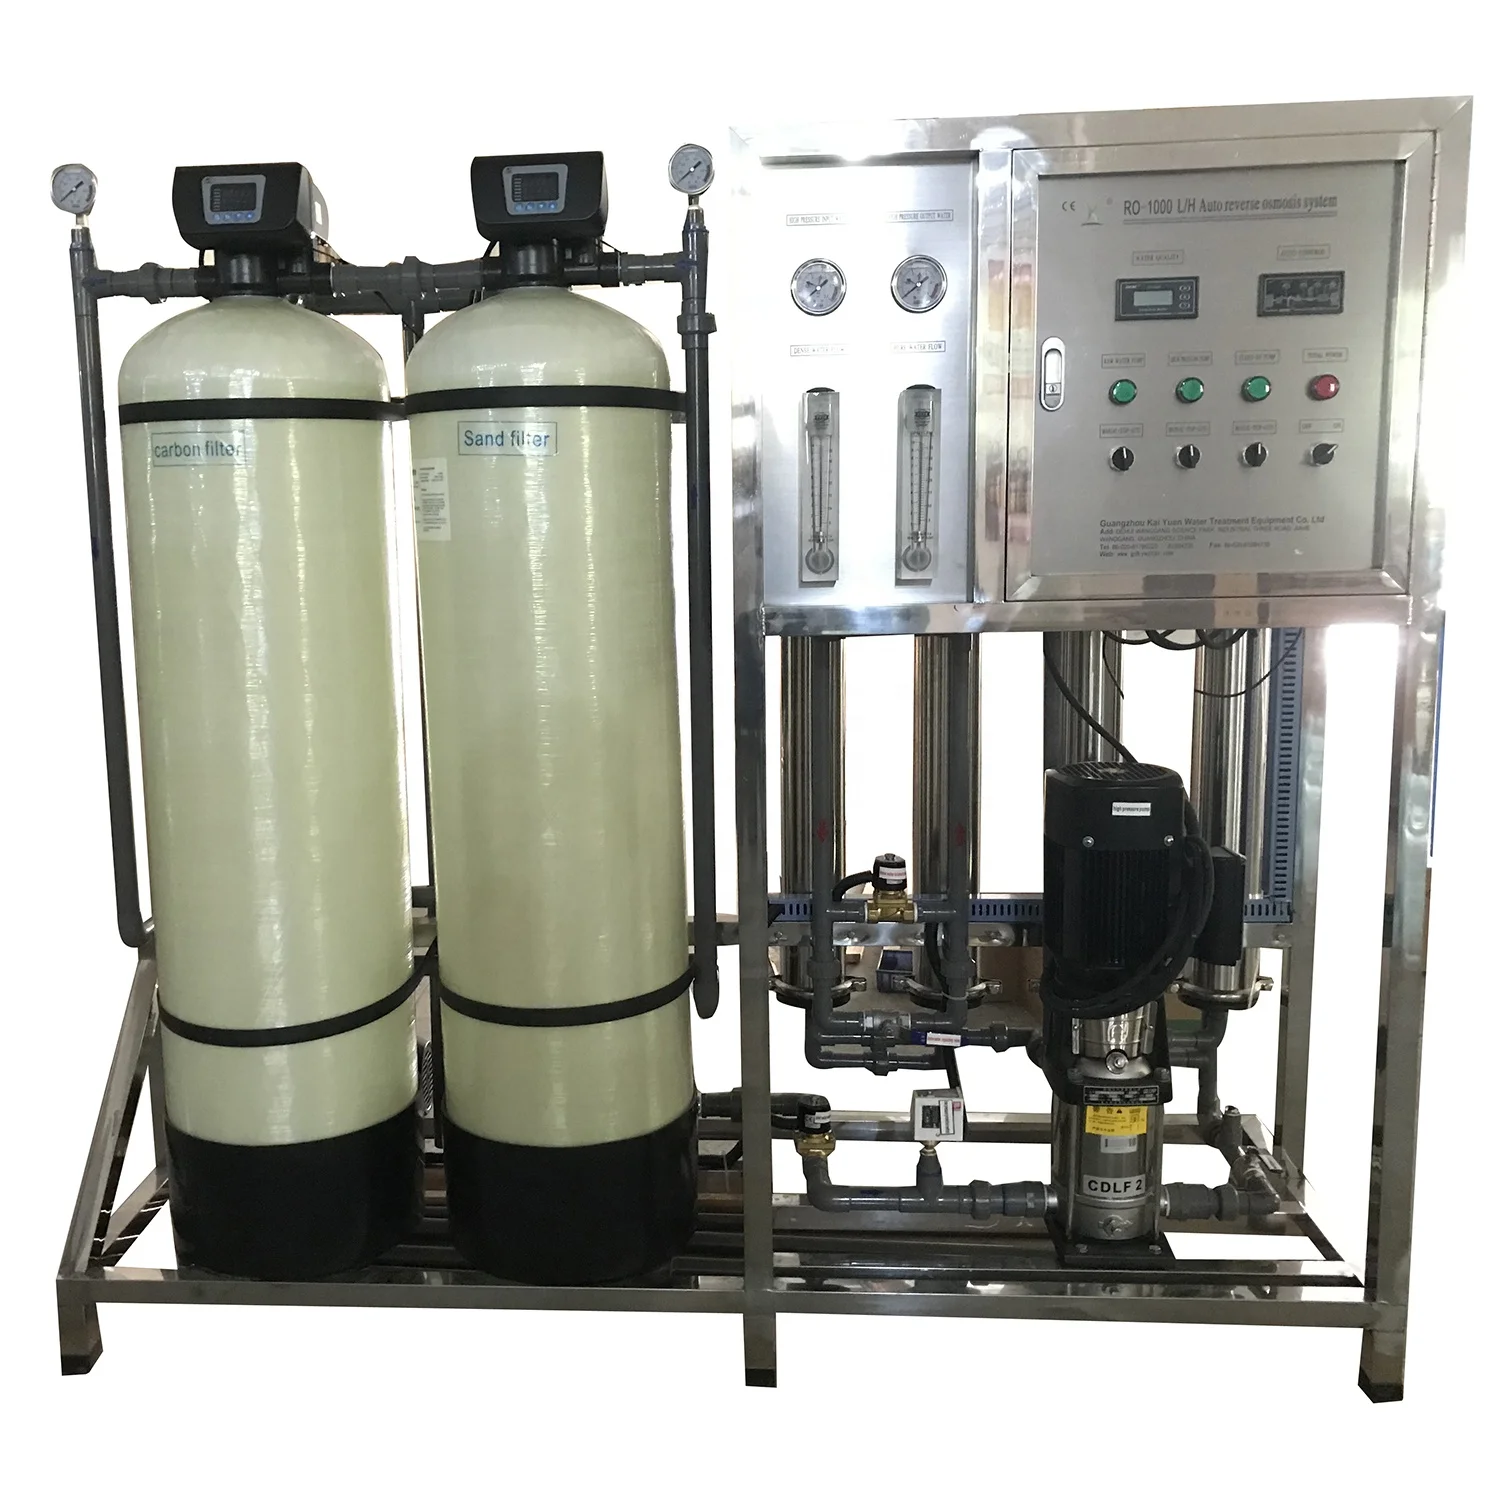 500 / 1000 / 1500 / 2000 LPH Pure mineral Drinking water RO Reverse Osmosis purifying treatment machine / system / plant (1600303691140)